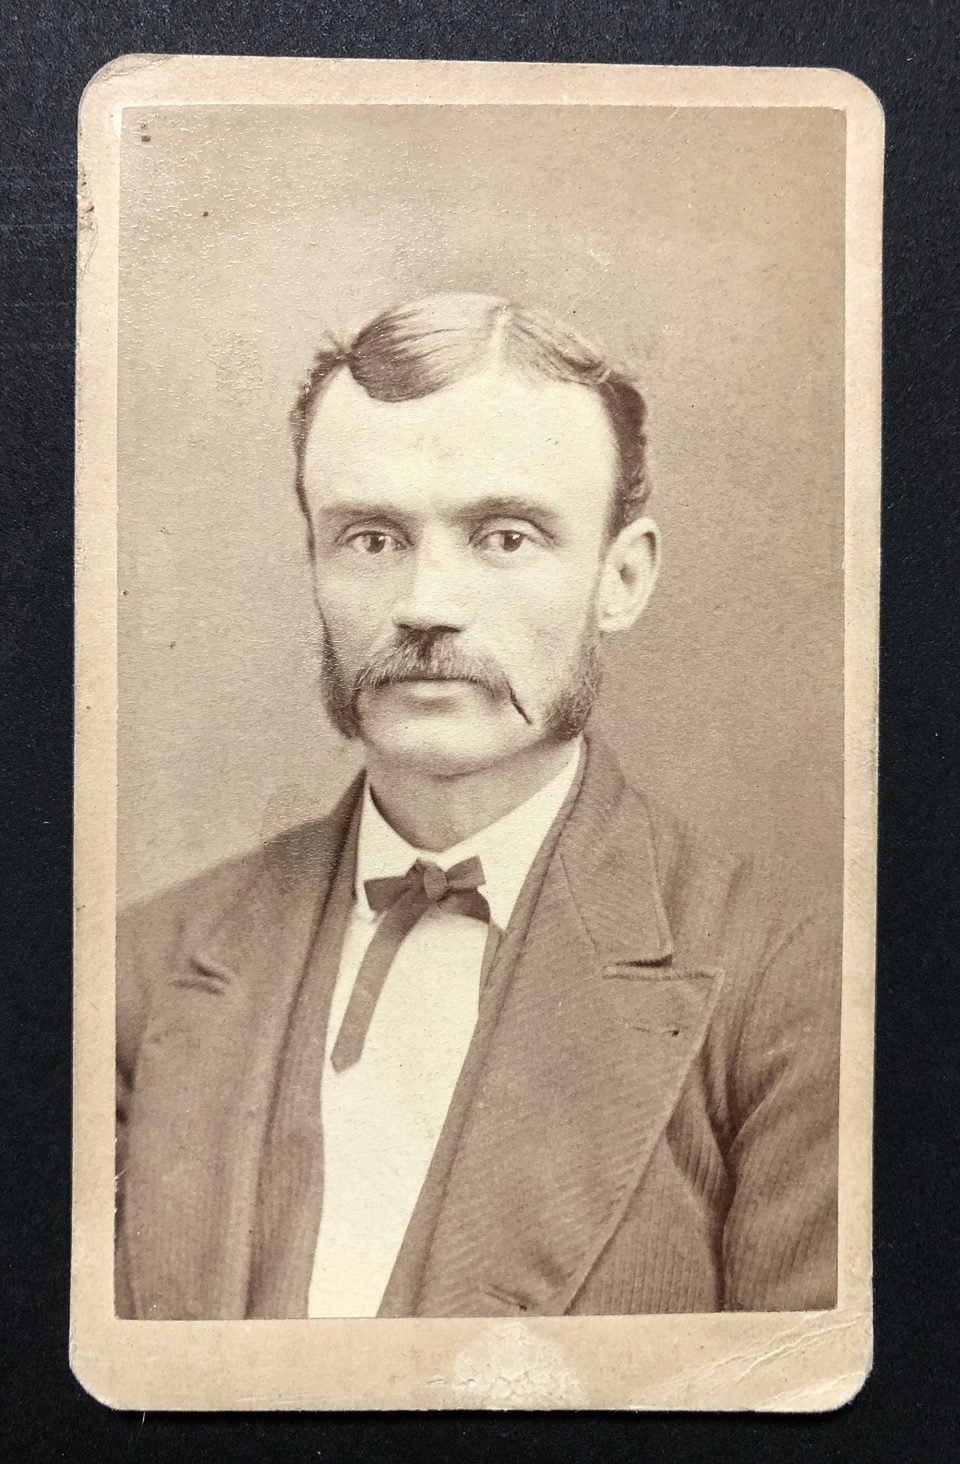 Carte de visite portrait of a man with a mustache and impressive sideburns by W.H Jacoby of Minneapolis, probably circa 1870s.